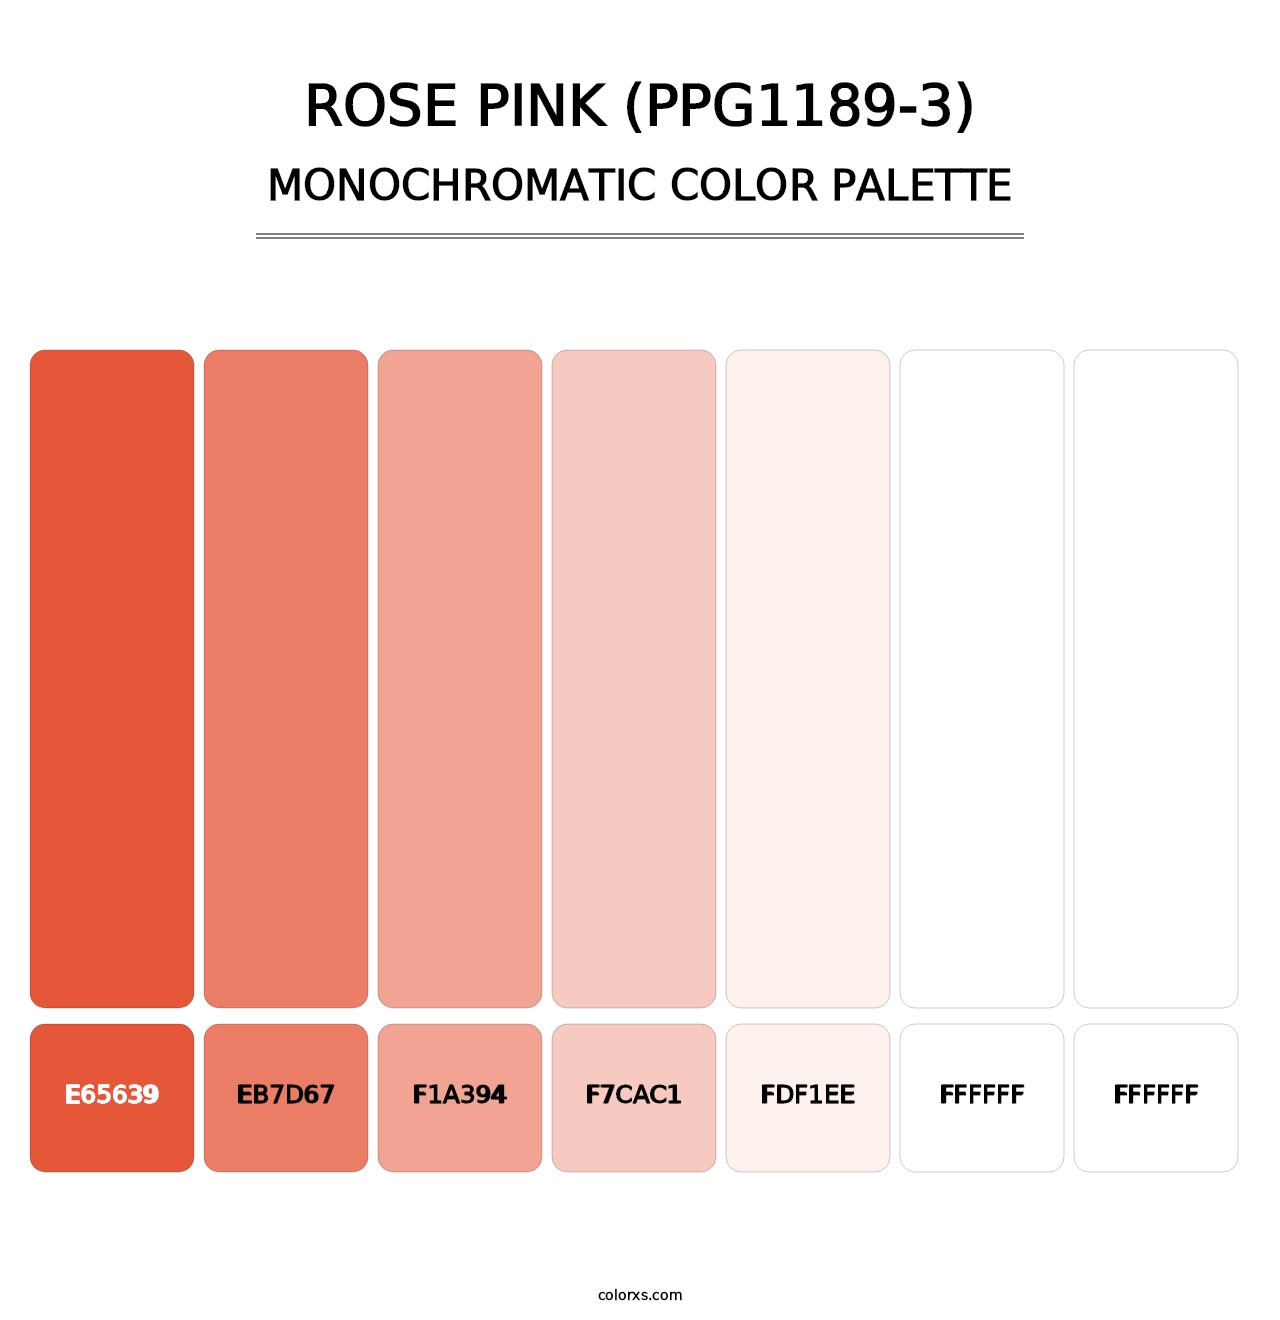 Rose Pink (PPG1189-3) - Monochromatic Color Palette